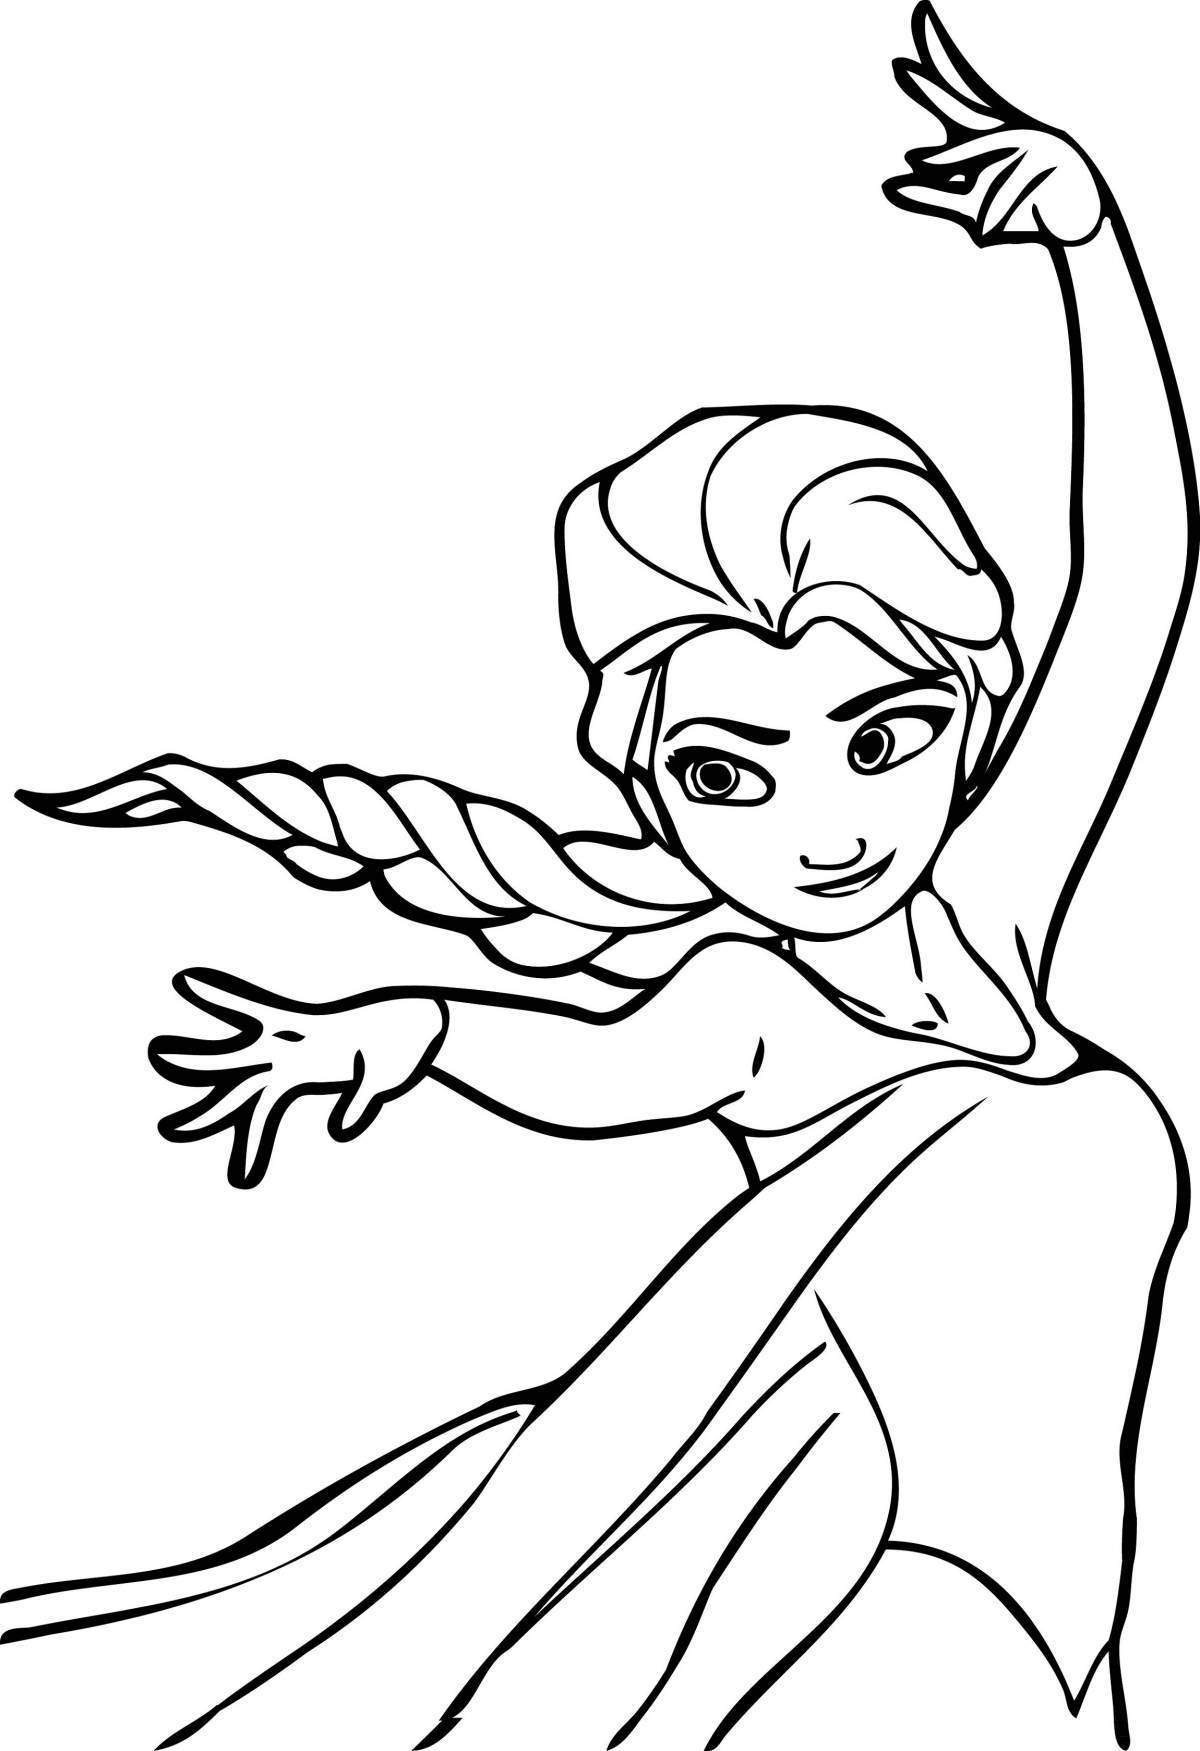 Exquisite elsa coloring book for kids